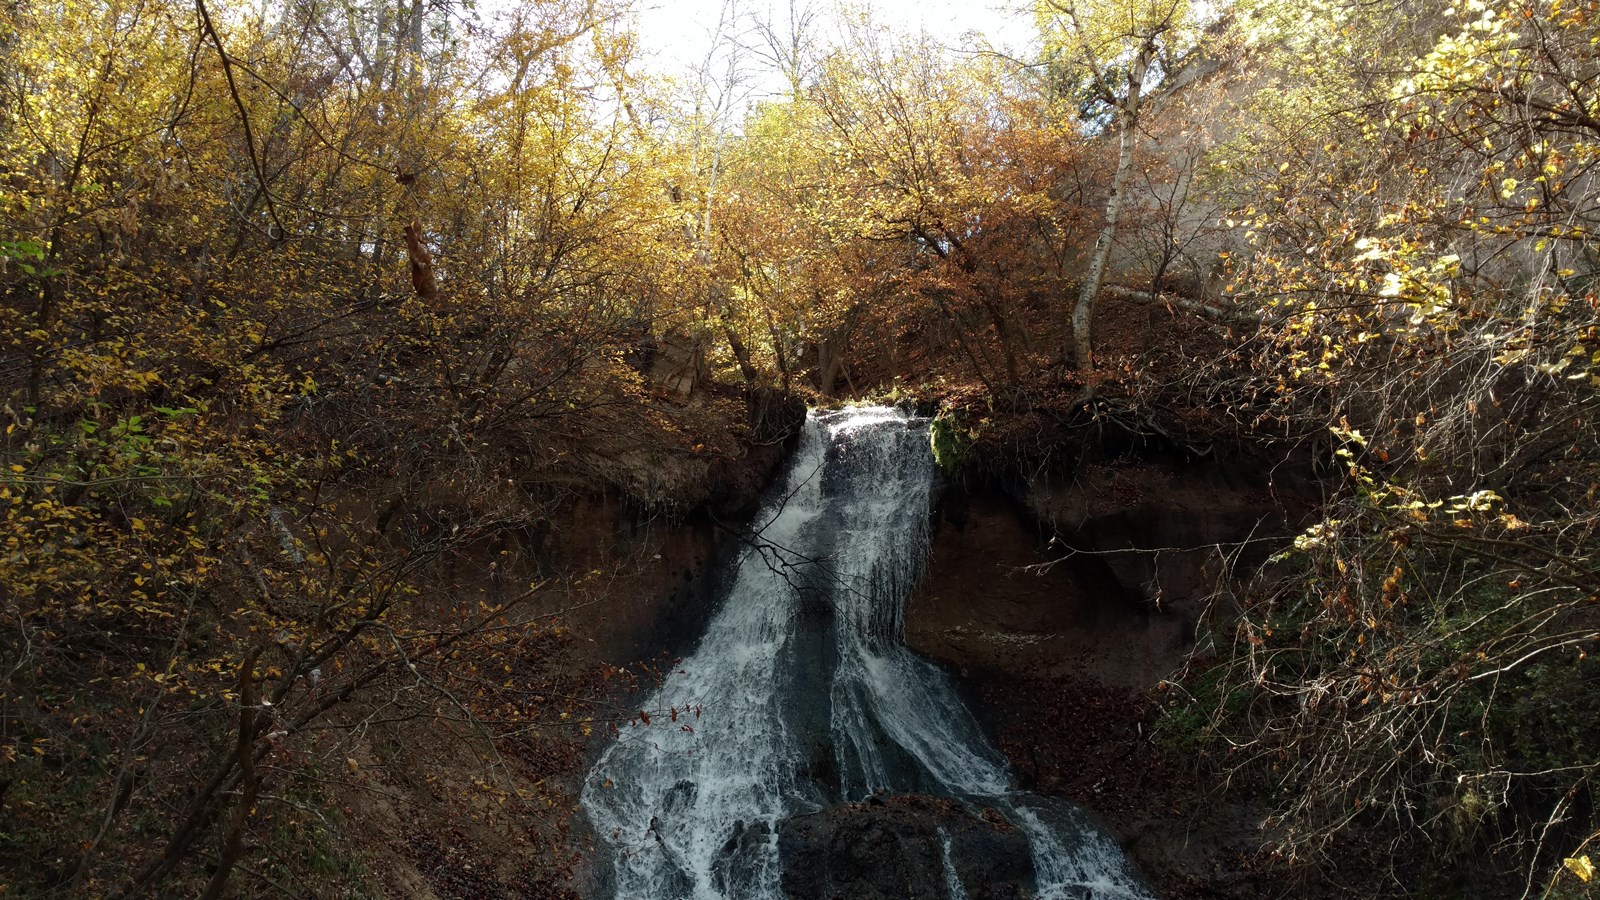 A waterfall flows over a ledge into a canyon in autumn when the leaves are orange and brown.